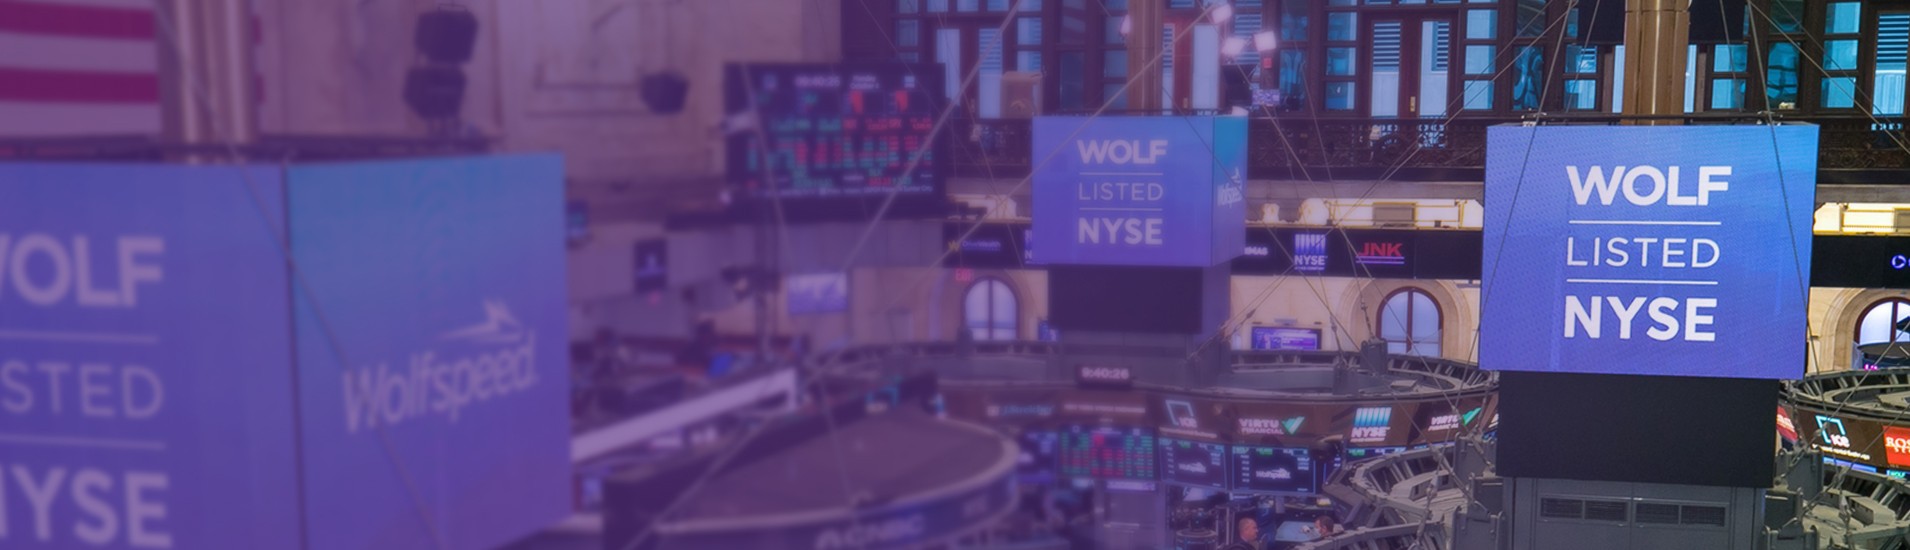 Image of Wolfspeed's WOLF ticker symbol on the New York Stock Exchange